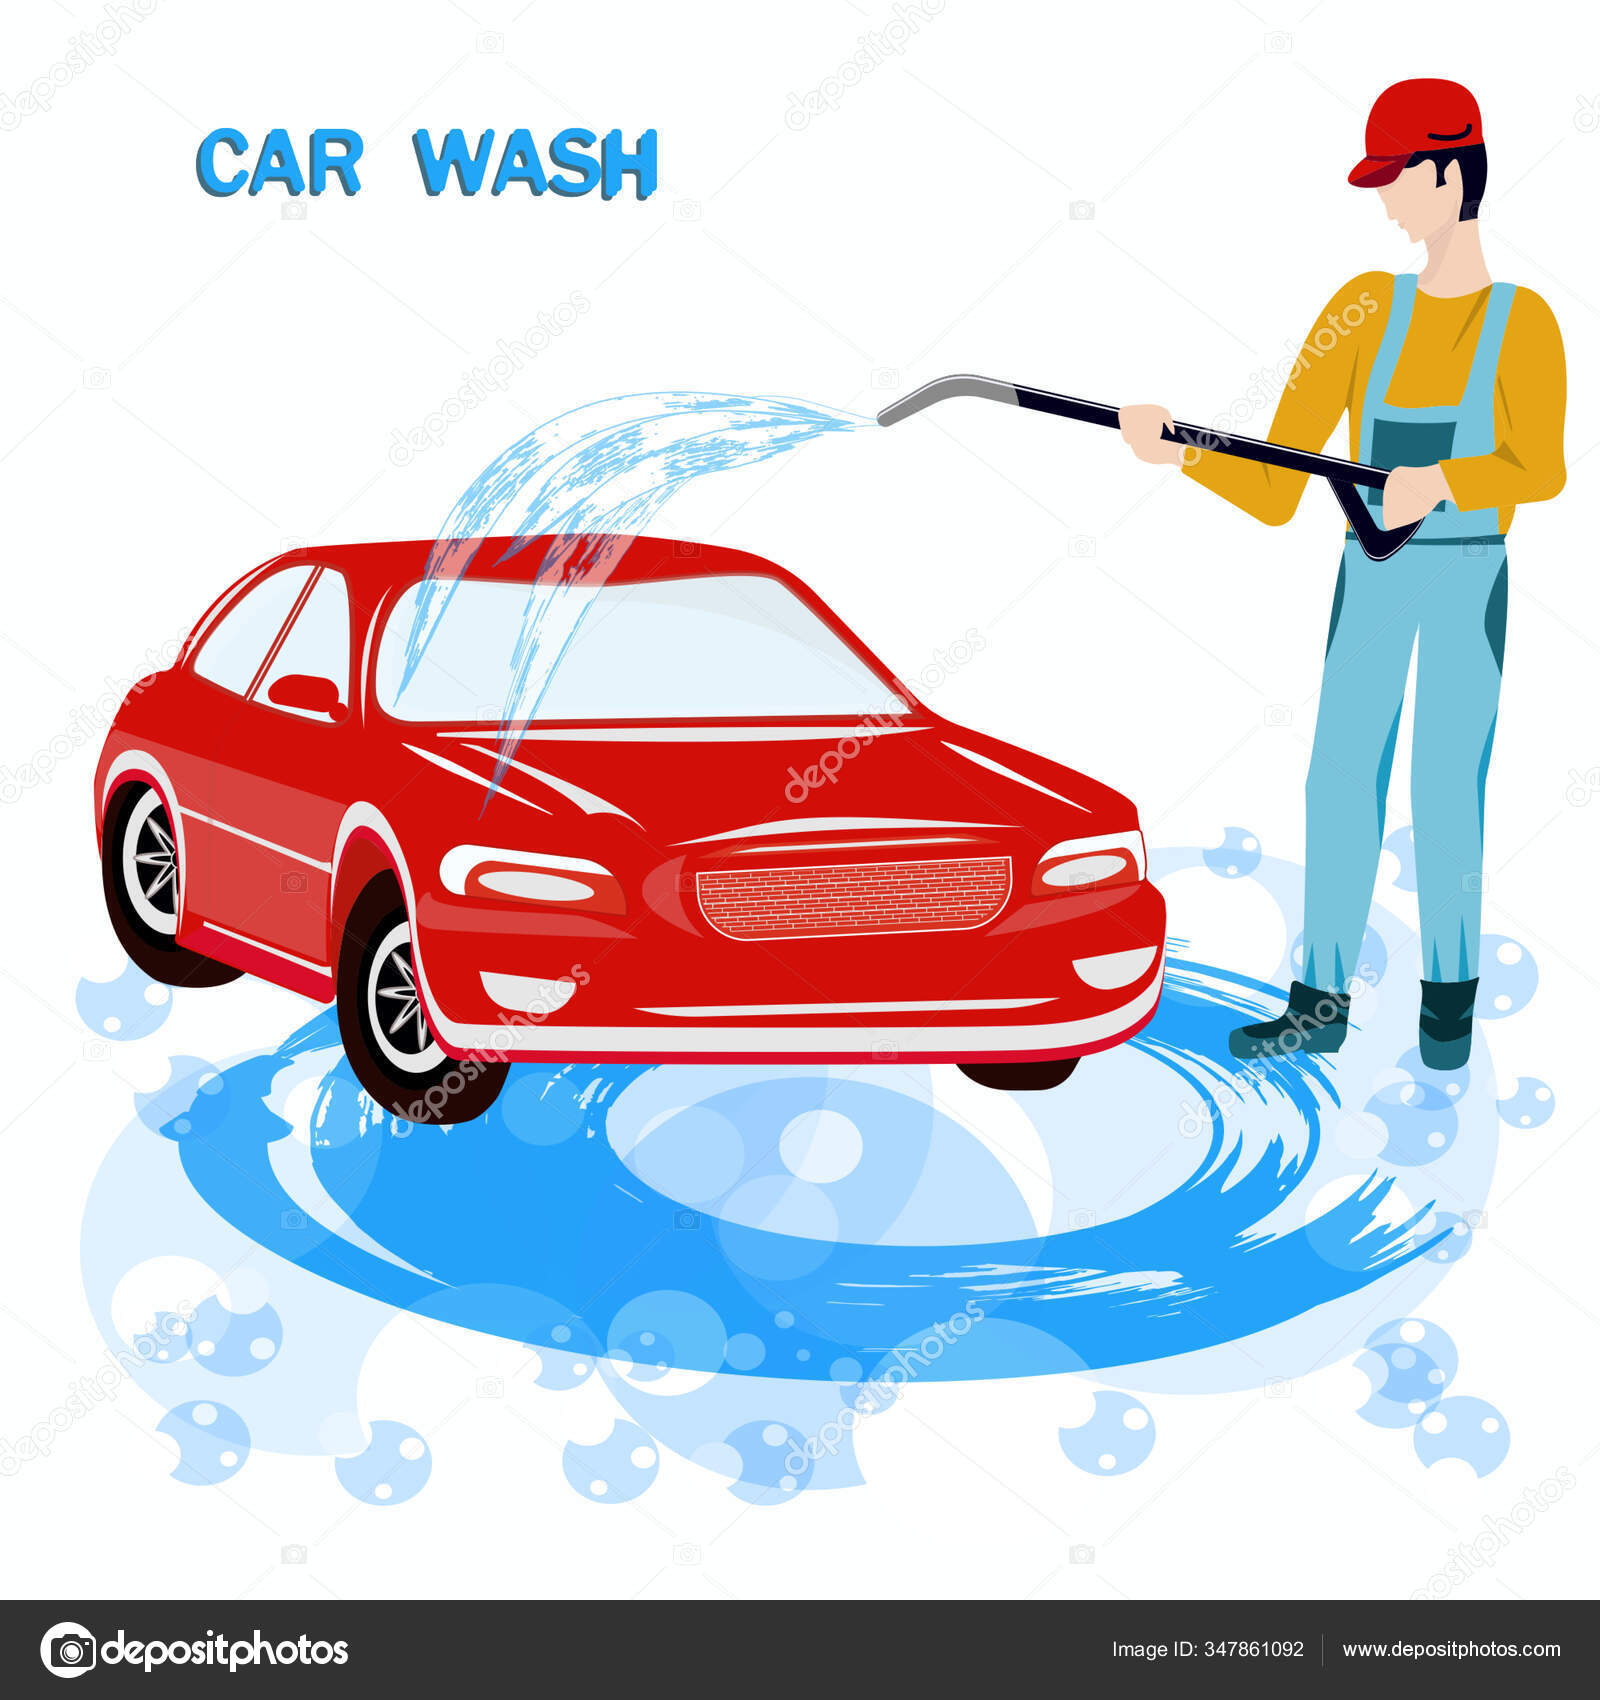 Car Wash Services Auto Cleaning With Water And Soap Stock Illustration -  Download Image Now - iStock